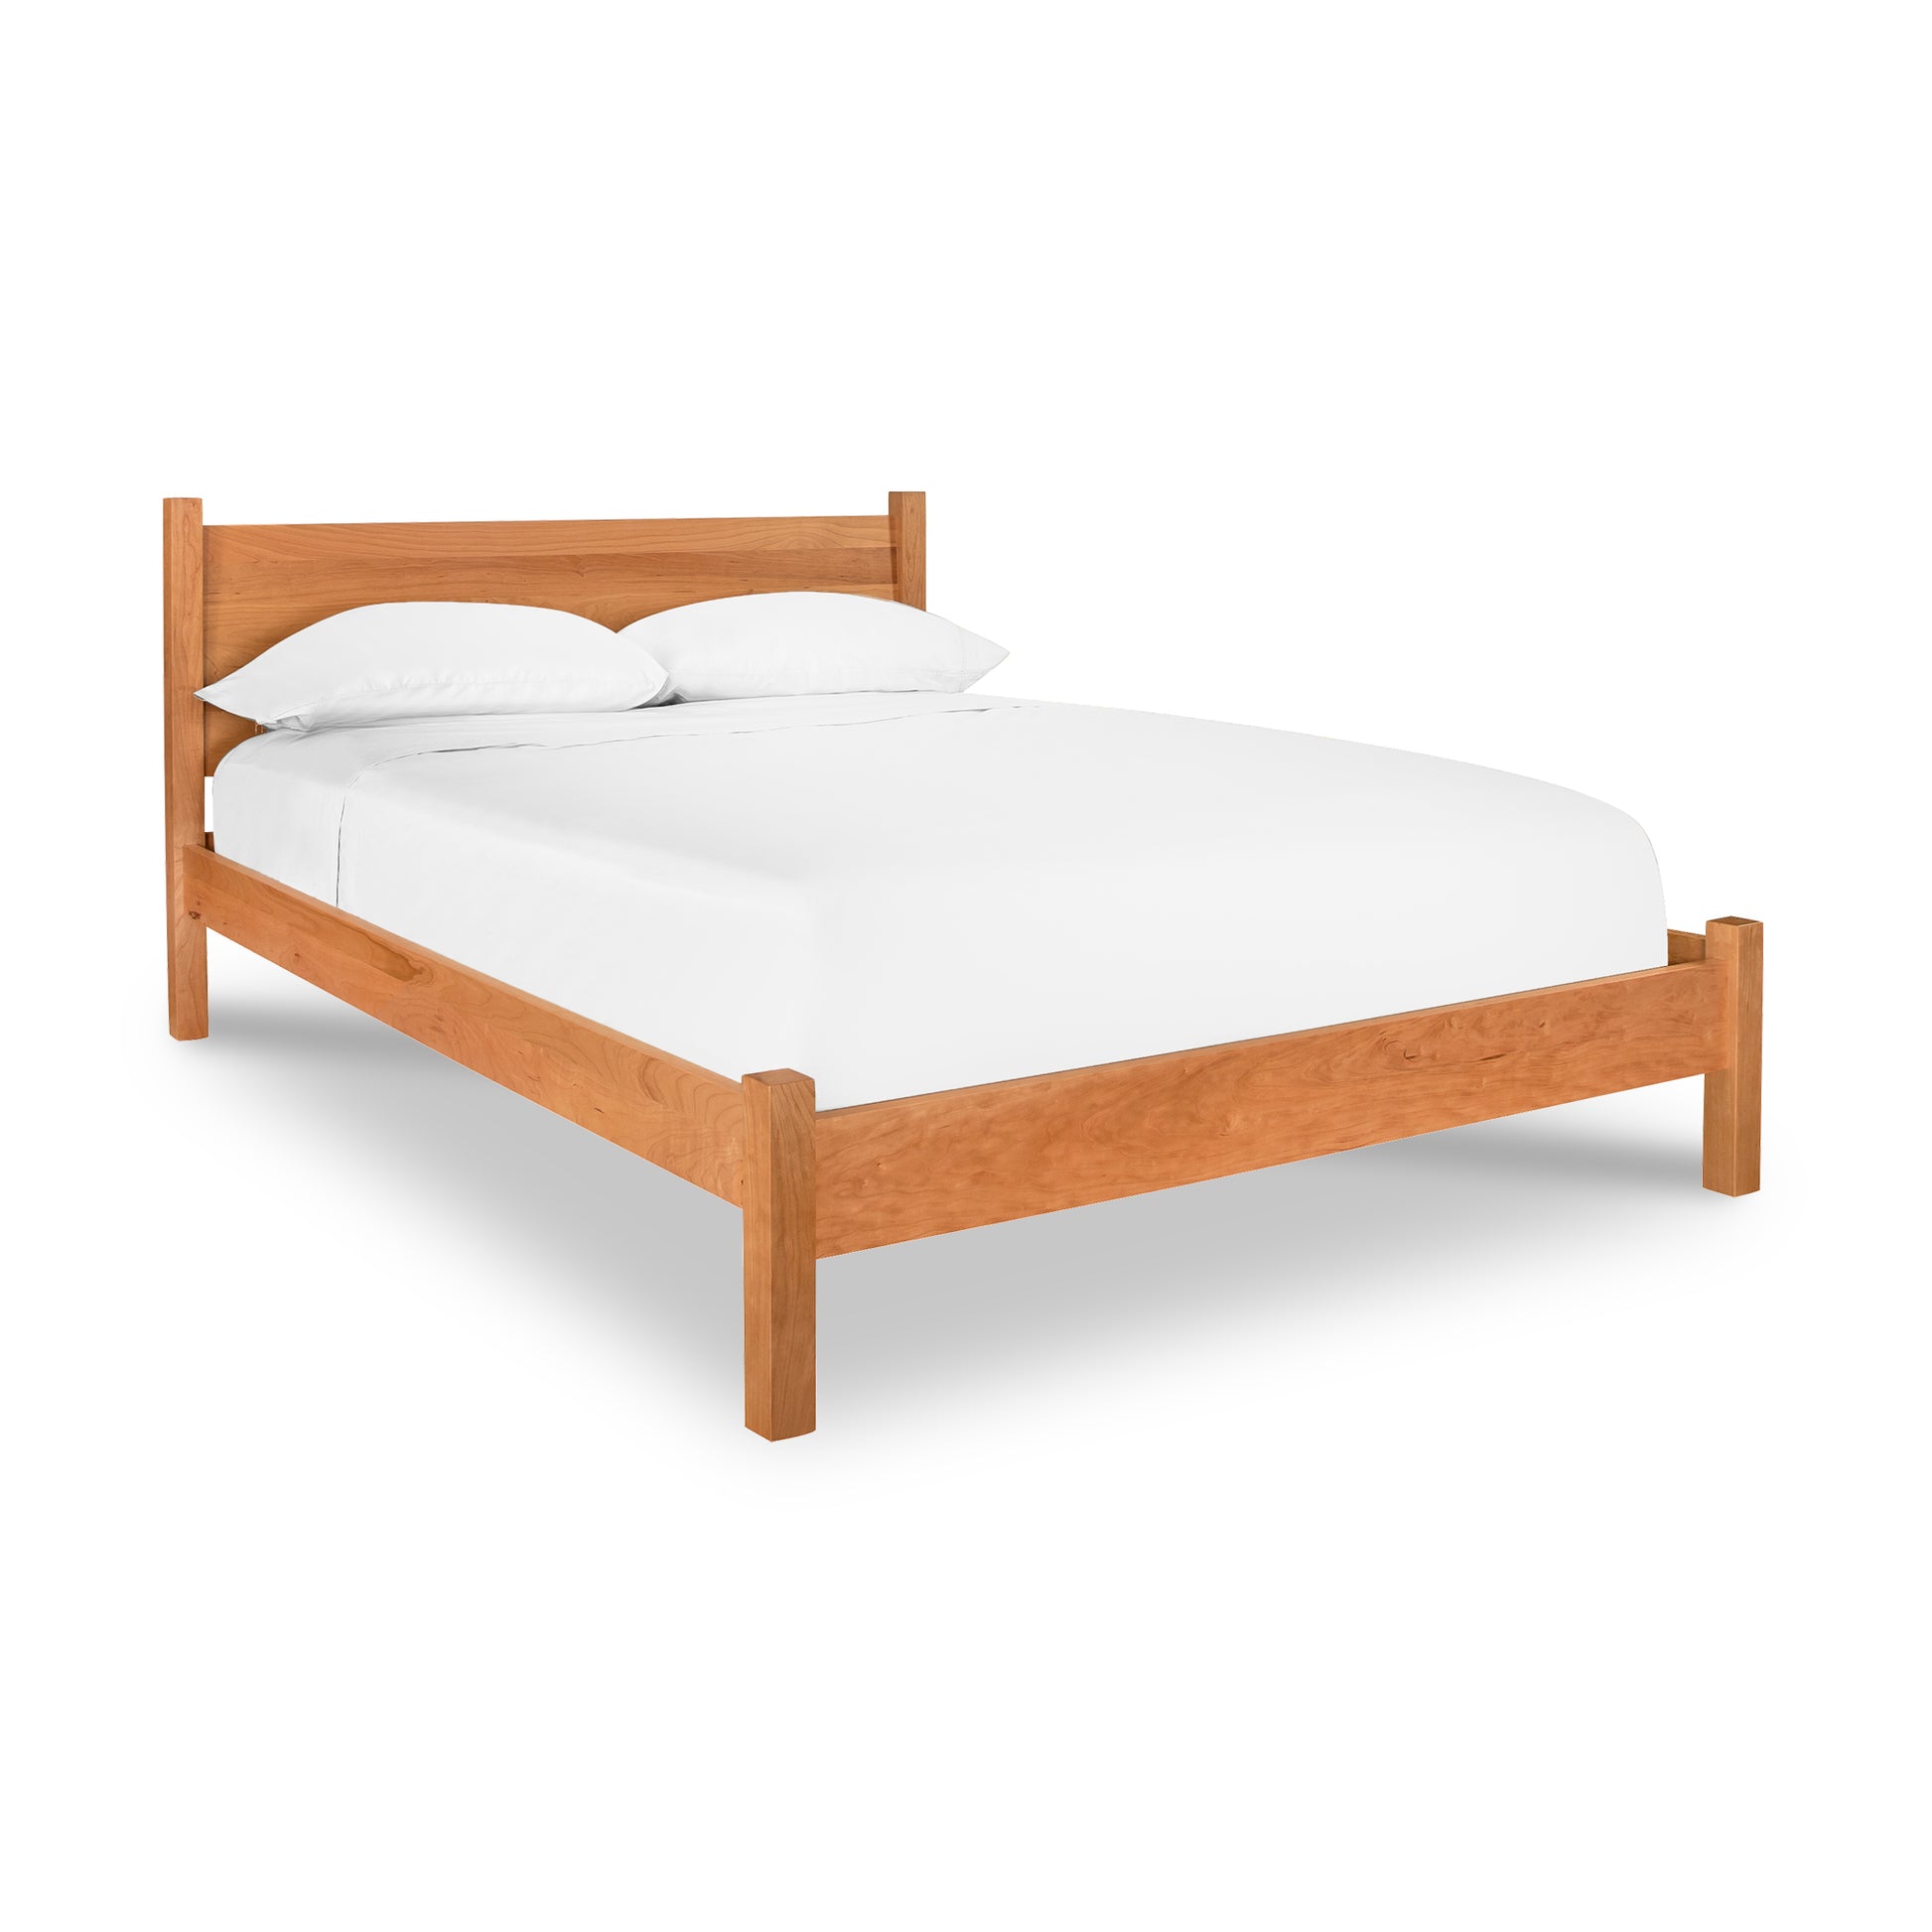 A Classic Wood Bed with white sheets on it, handcrafted in Vermont by Lyndon Furniture.